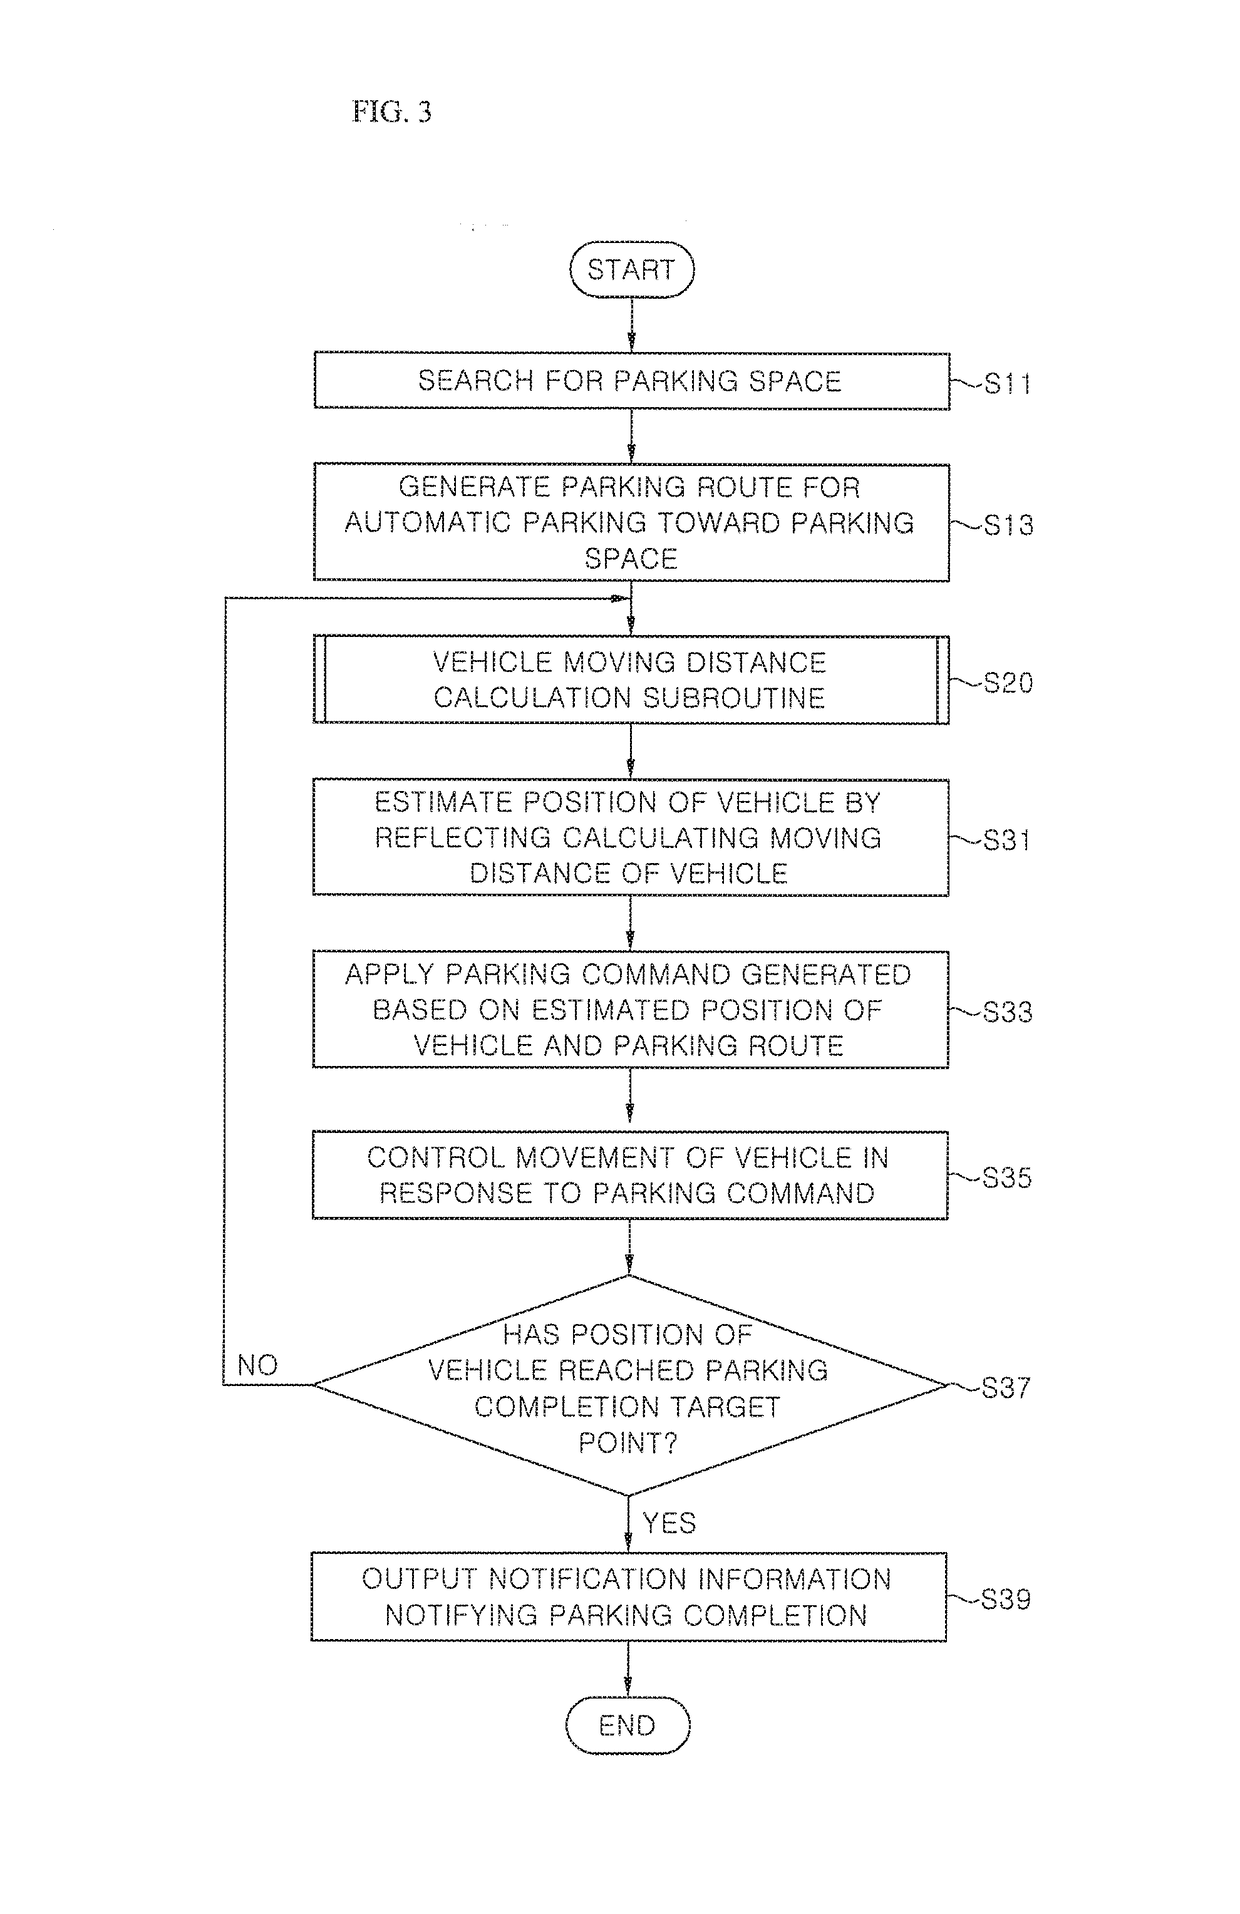 Parking assistance device using tire pressure monitoring system